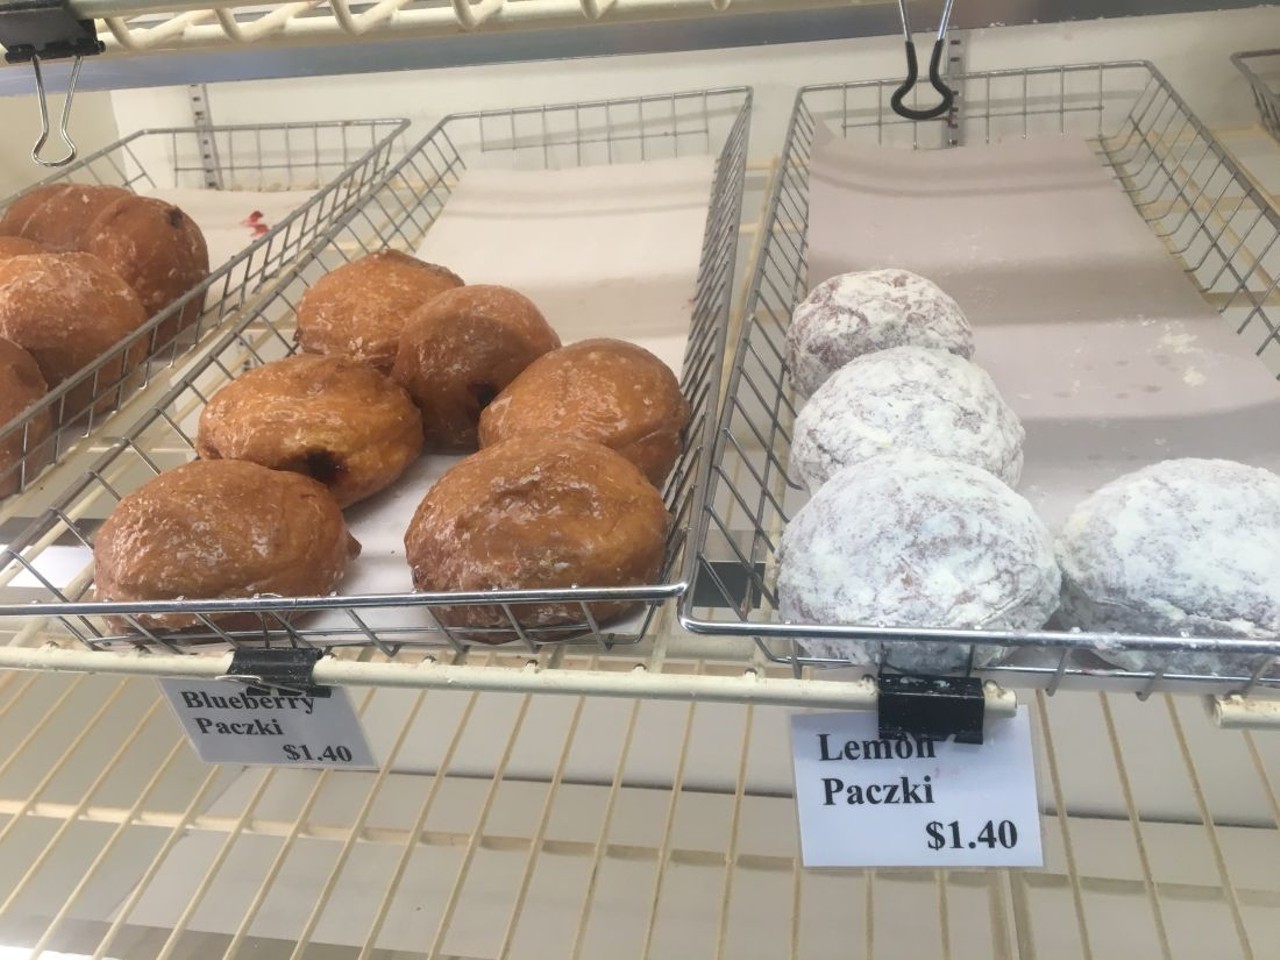 Willie's Donuts 
This hole-in-the-wall donut shop in Macomb Twp. will be serving up several different varieties of paczki on Fat Tuesday. Get em while you can! &nbsp; 
23055 21 Mile Rd, Macomb; 586-949-8755